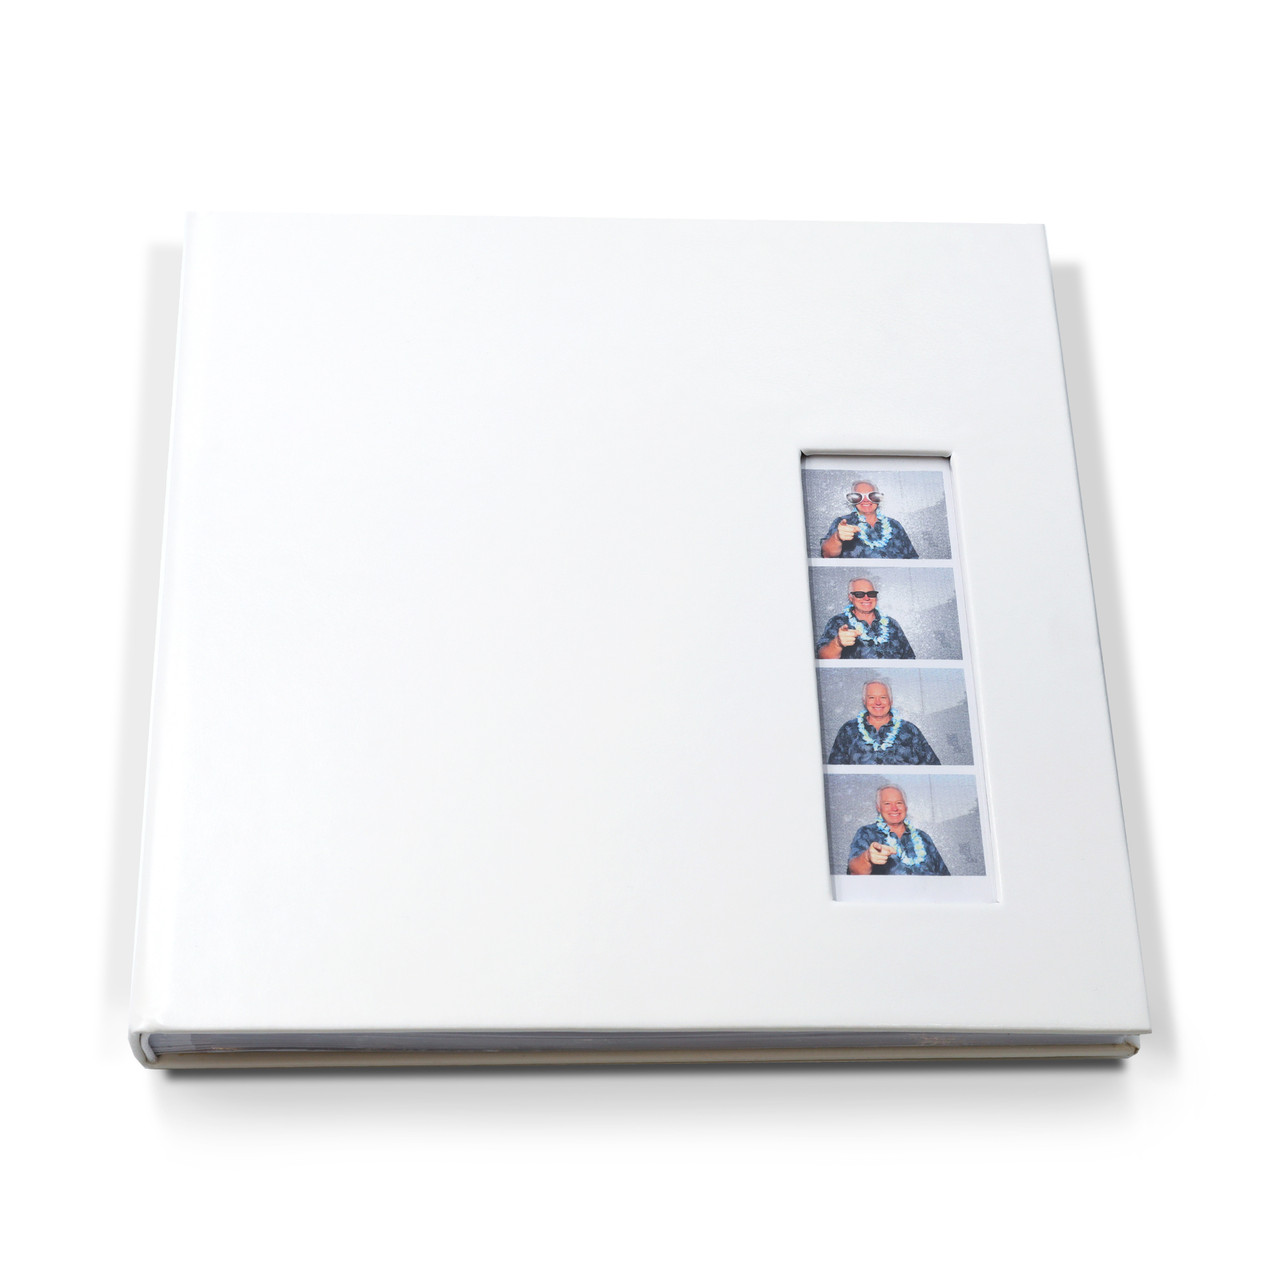 Photo Booth Photo Album with 2x6 cover